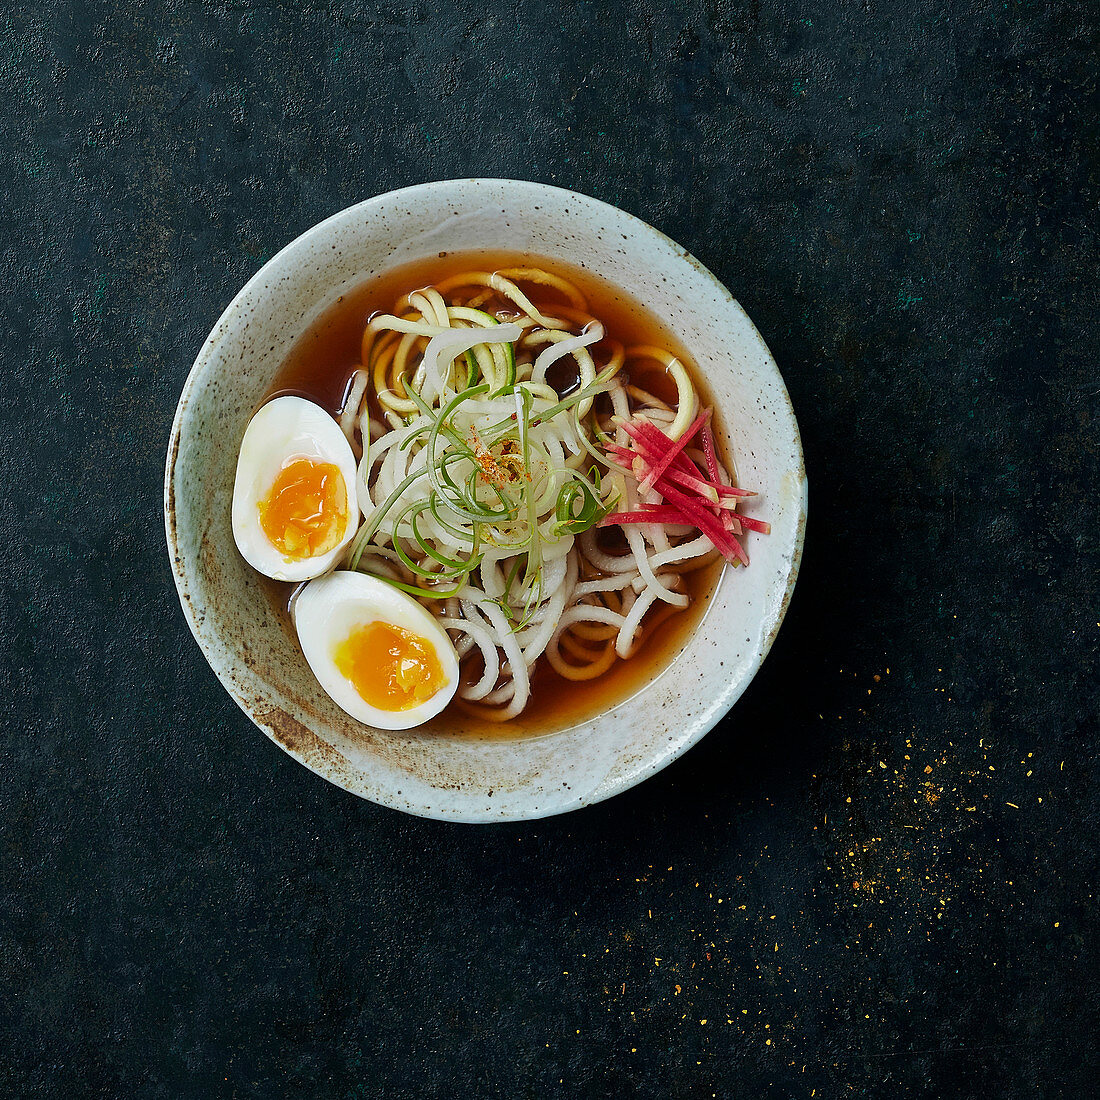 Vegetable udon noodles with black radish and courgette in broth, with soft-boiled eggs